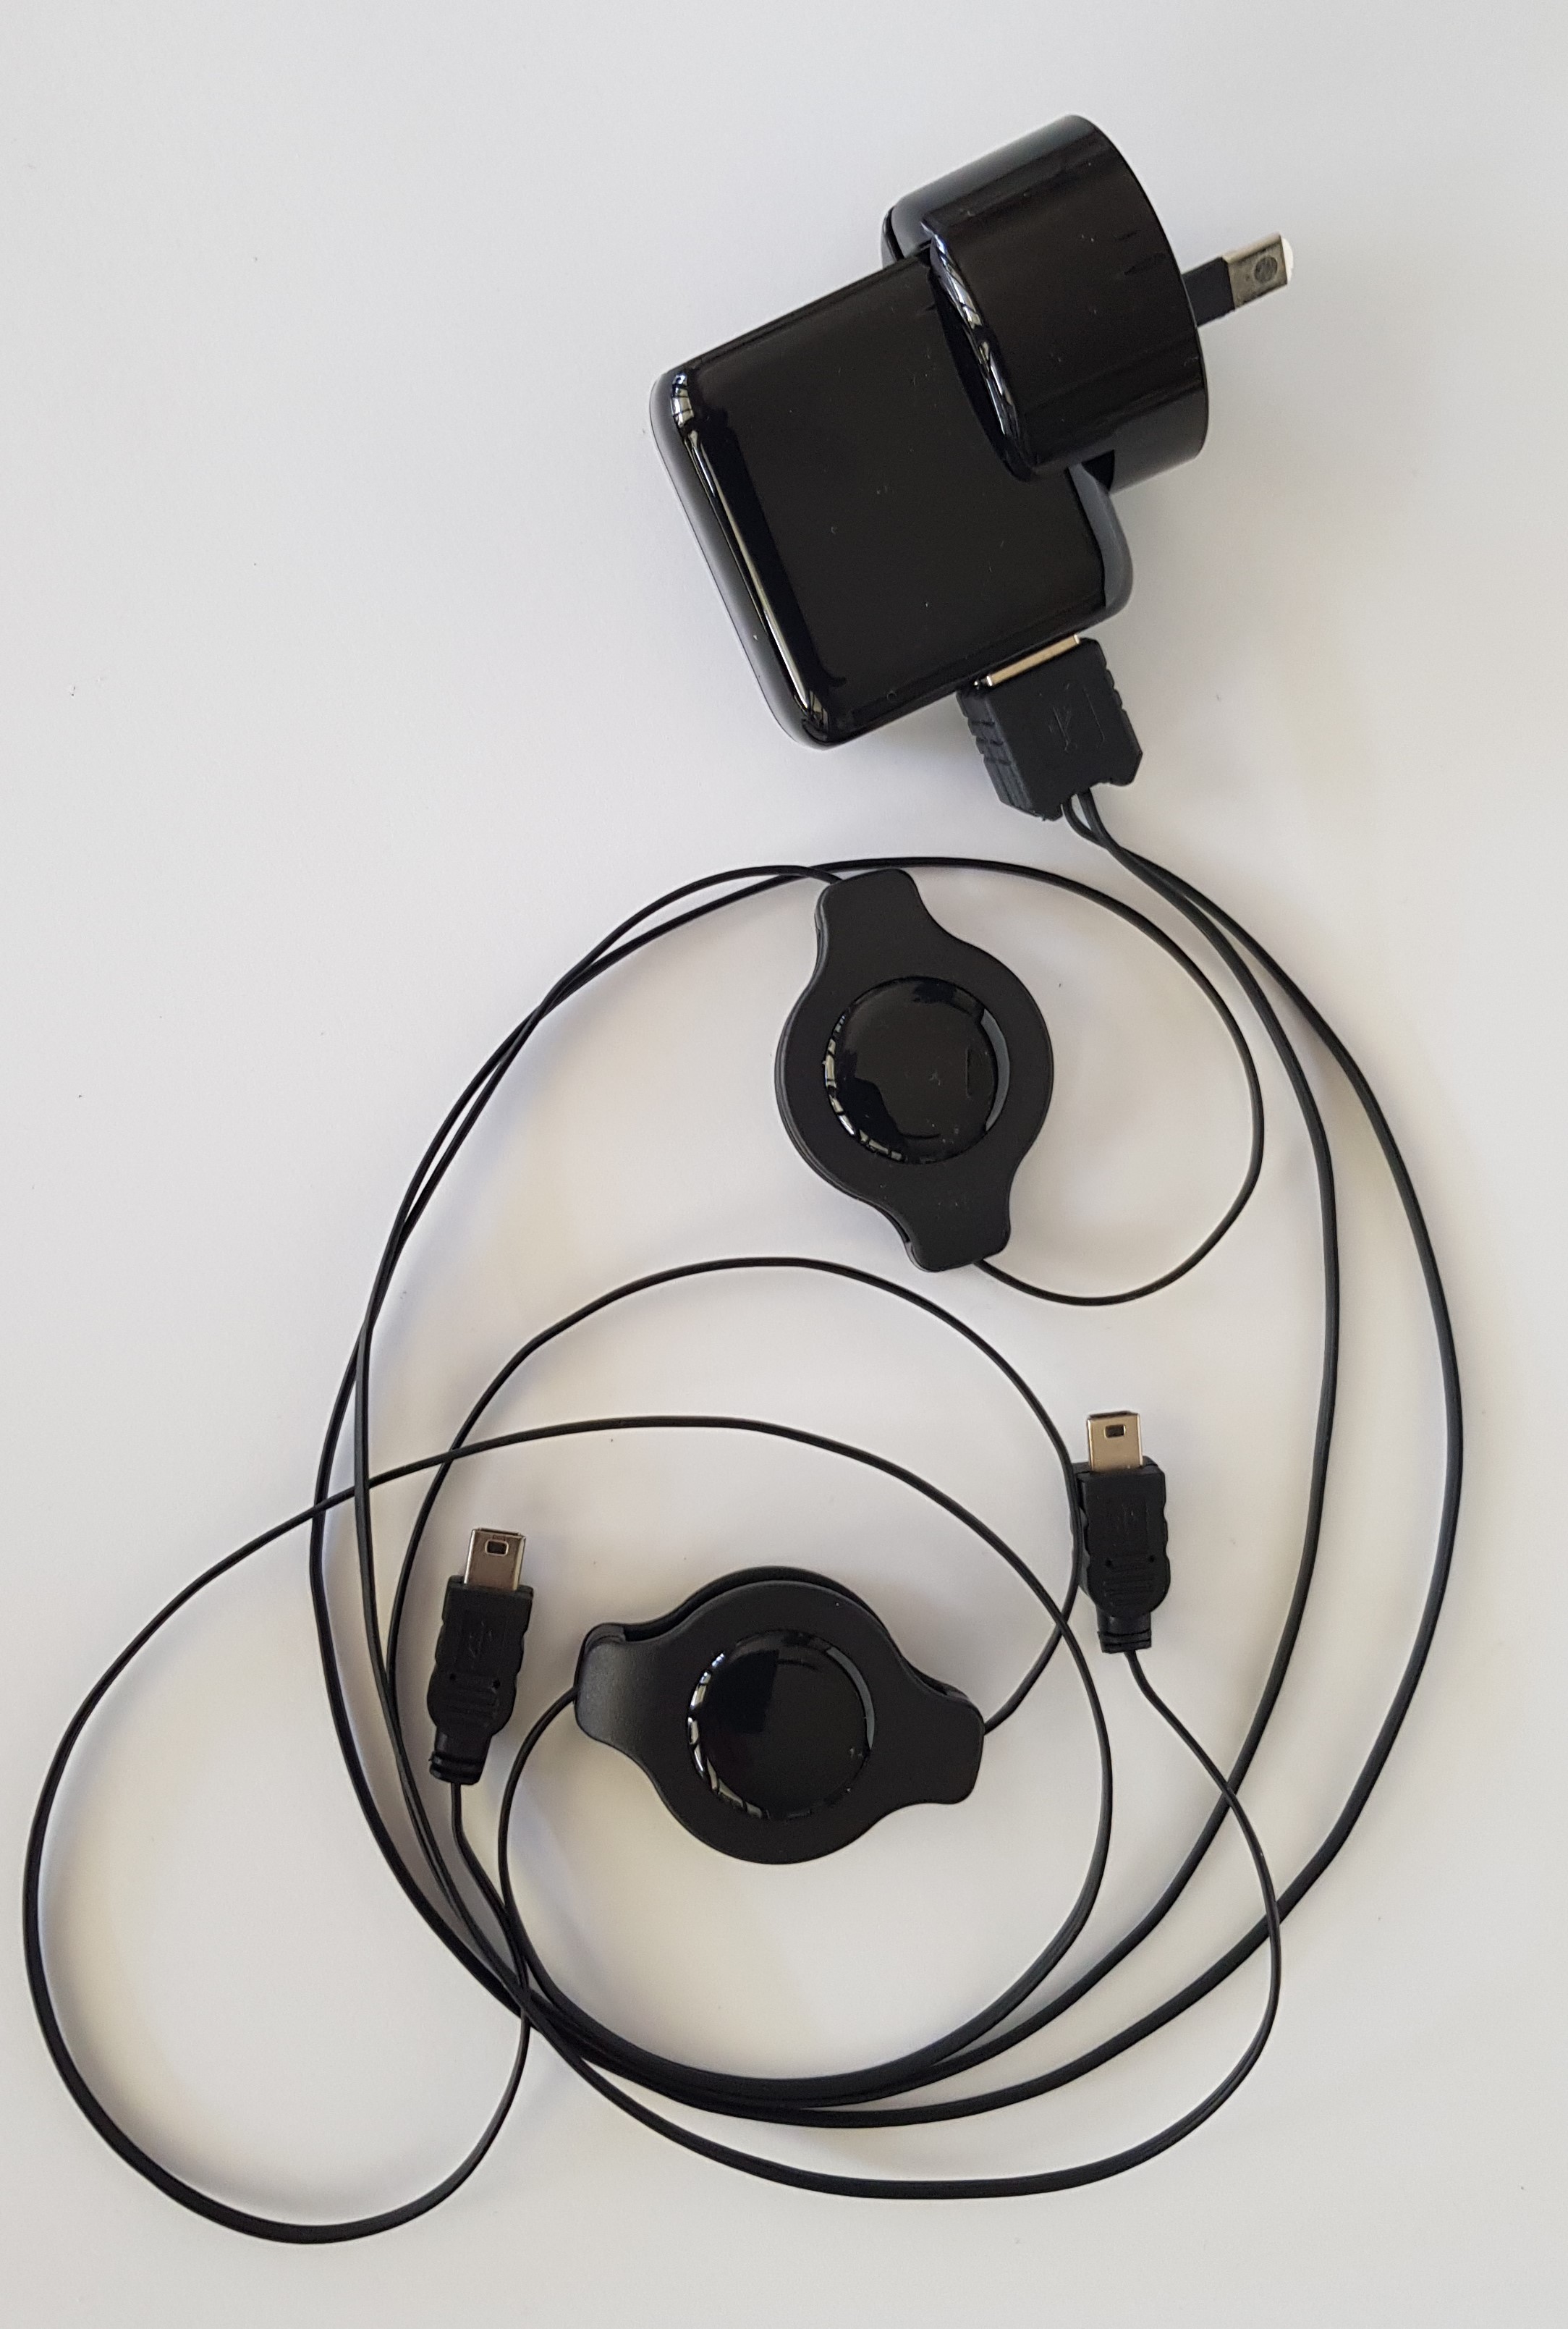 EQ-1 USB Headset Charger - No longer avialable